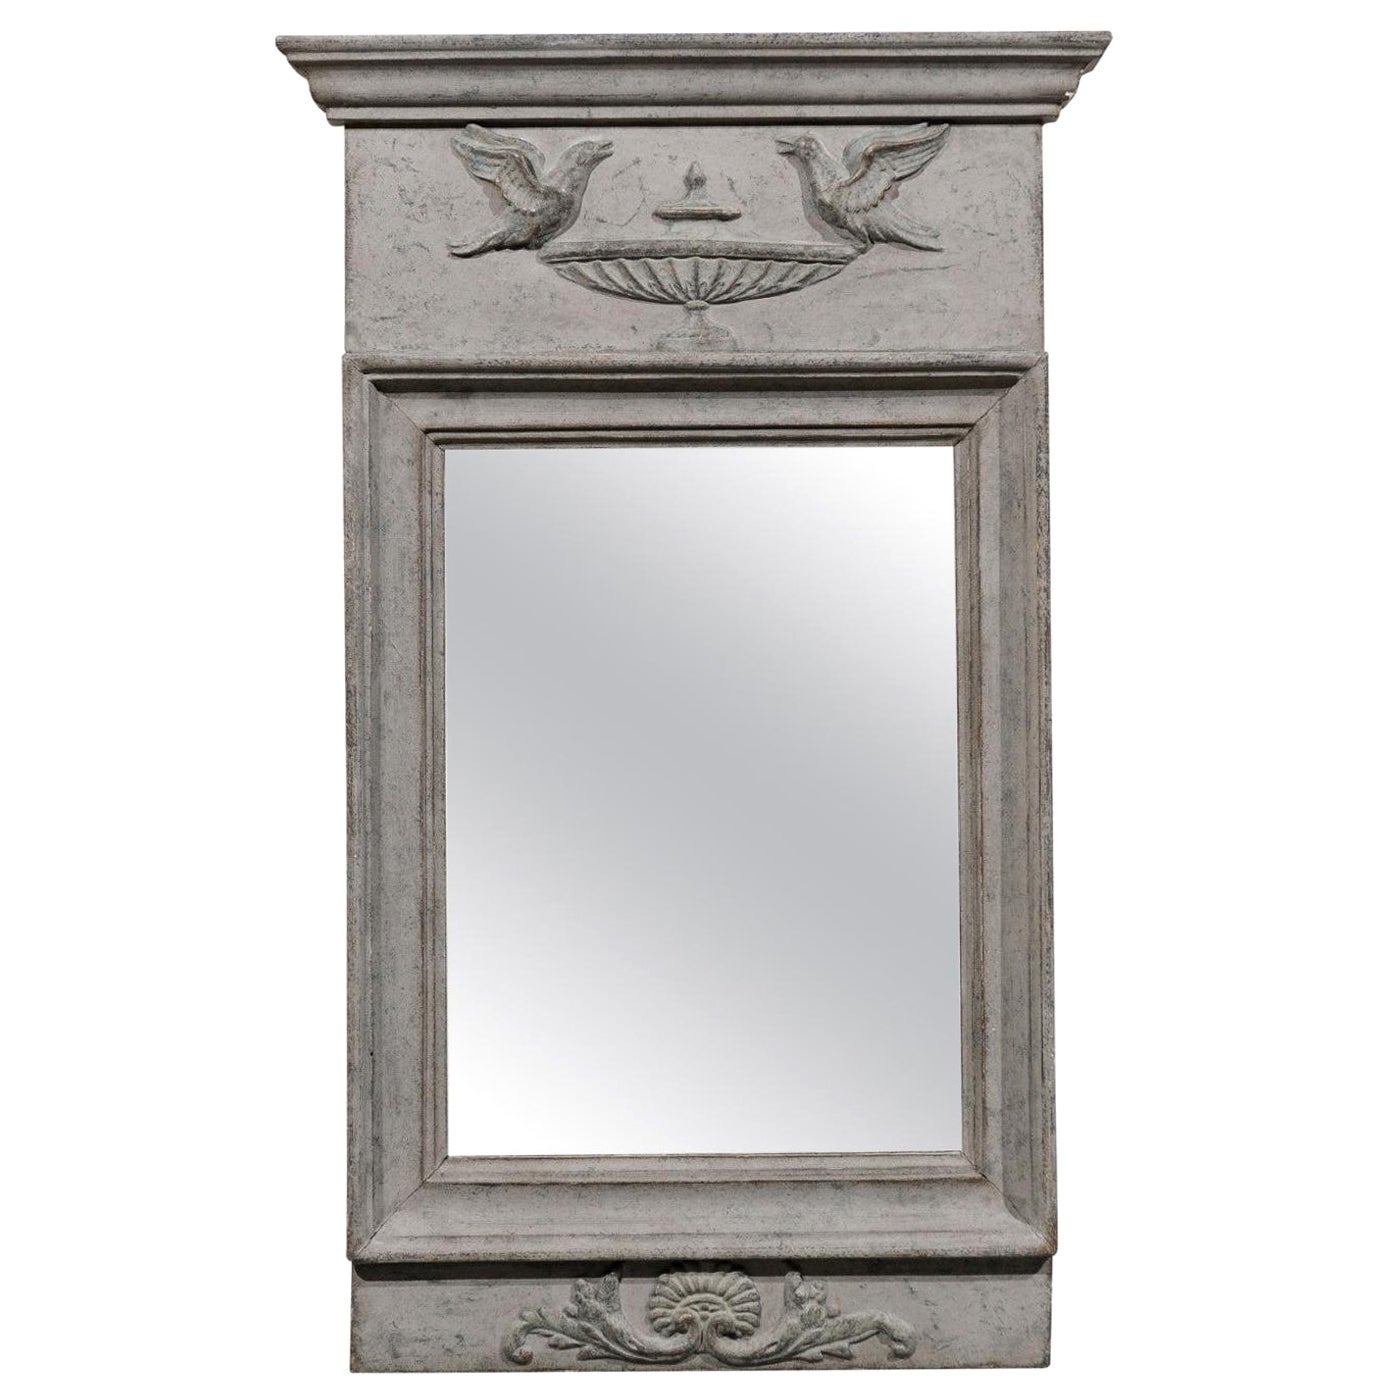 Swedish Neoclassical Style 19th Century Mirror with Doves Perched on an Urn For Sale